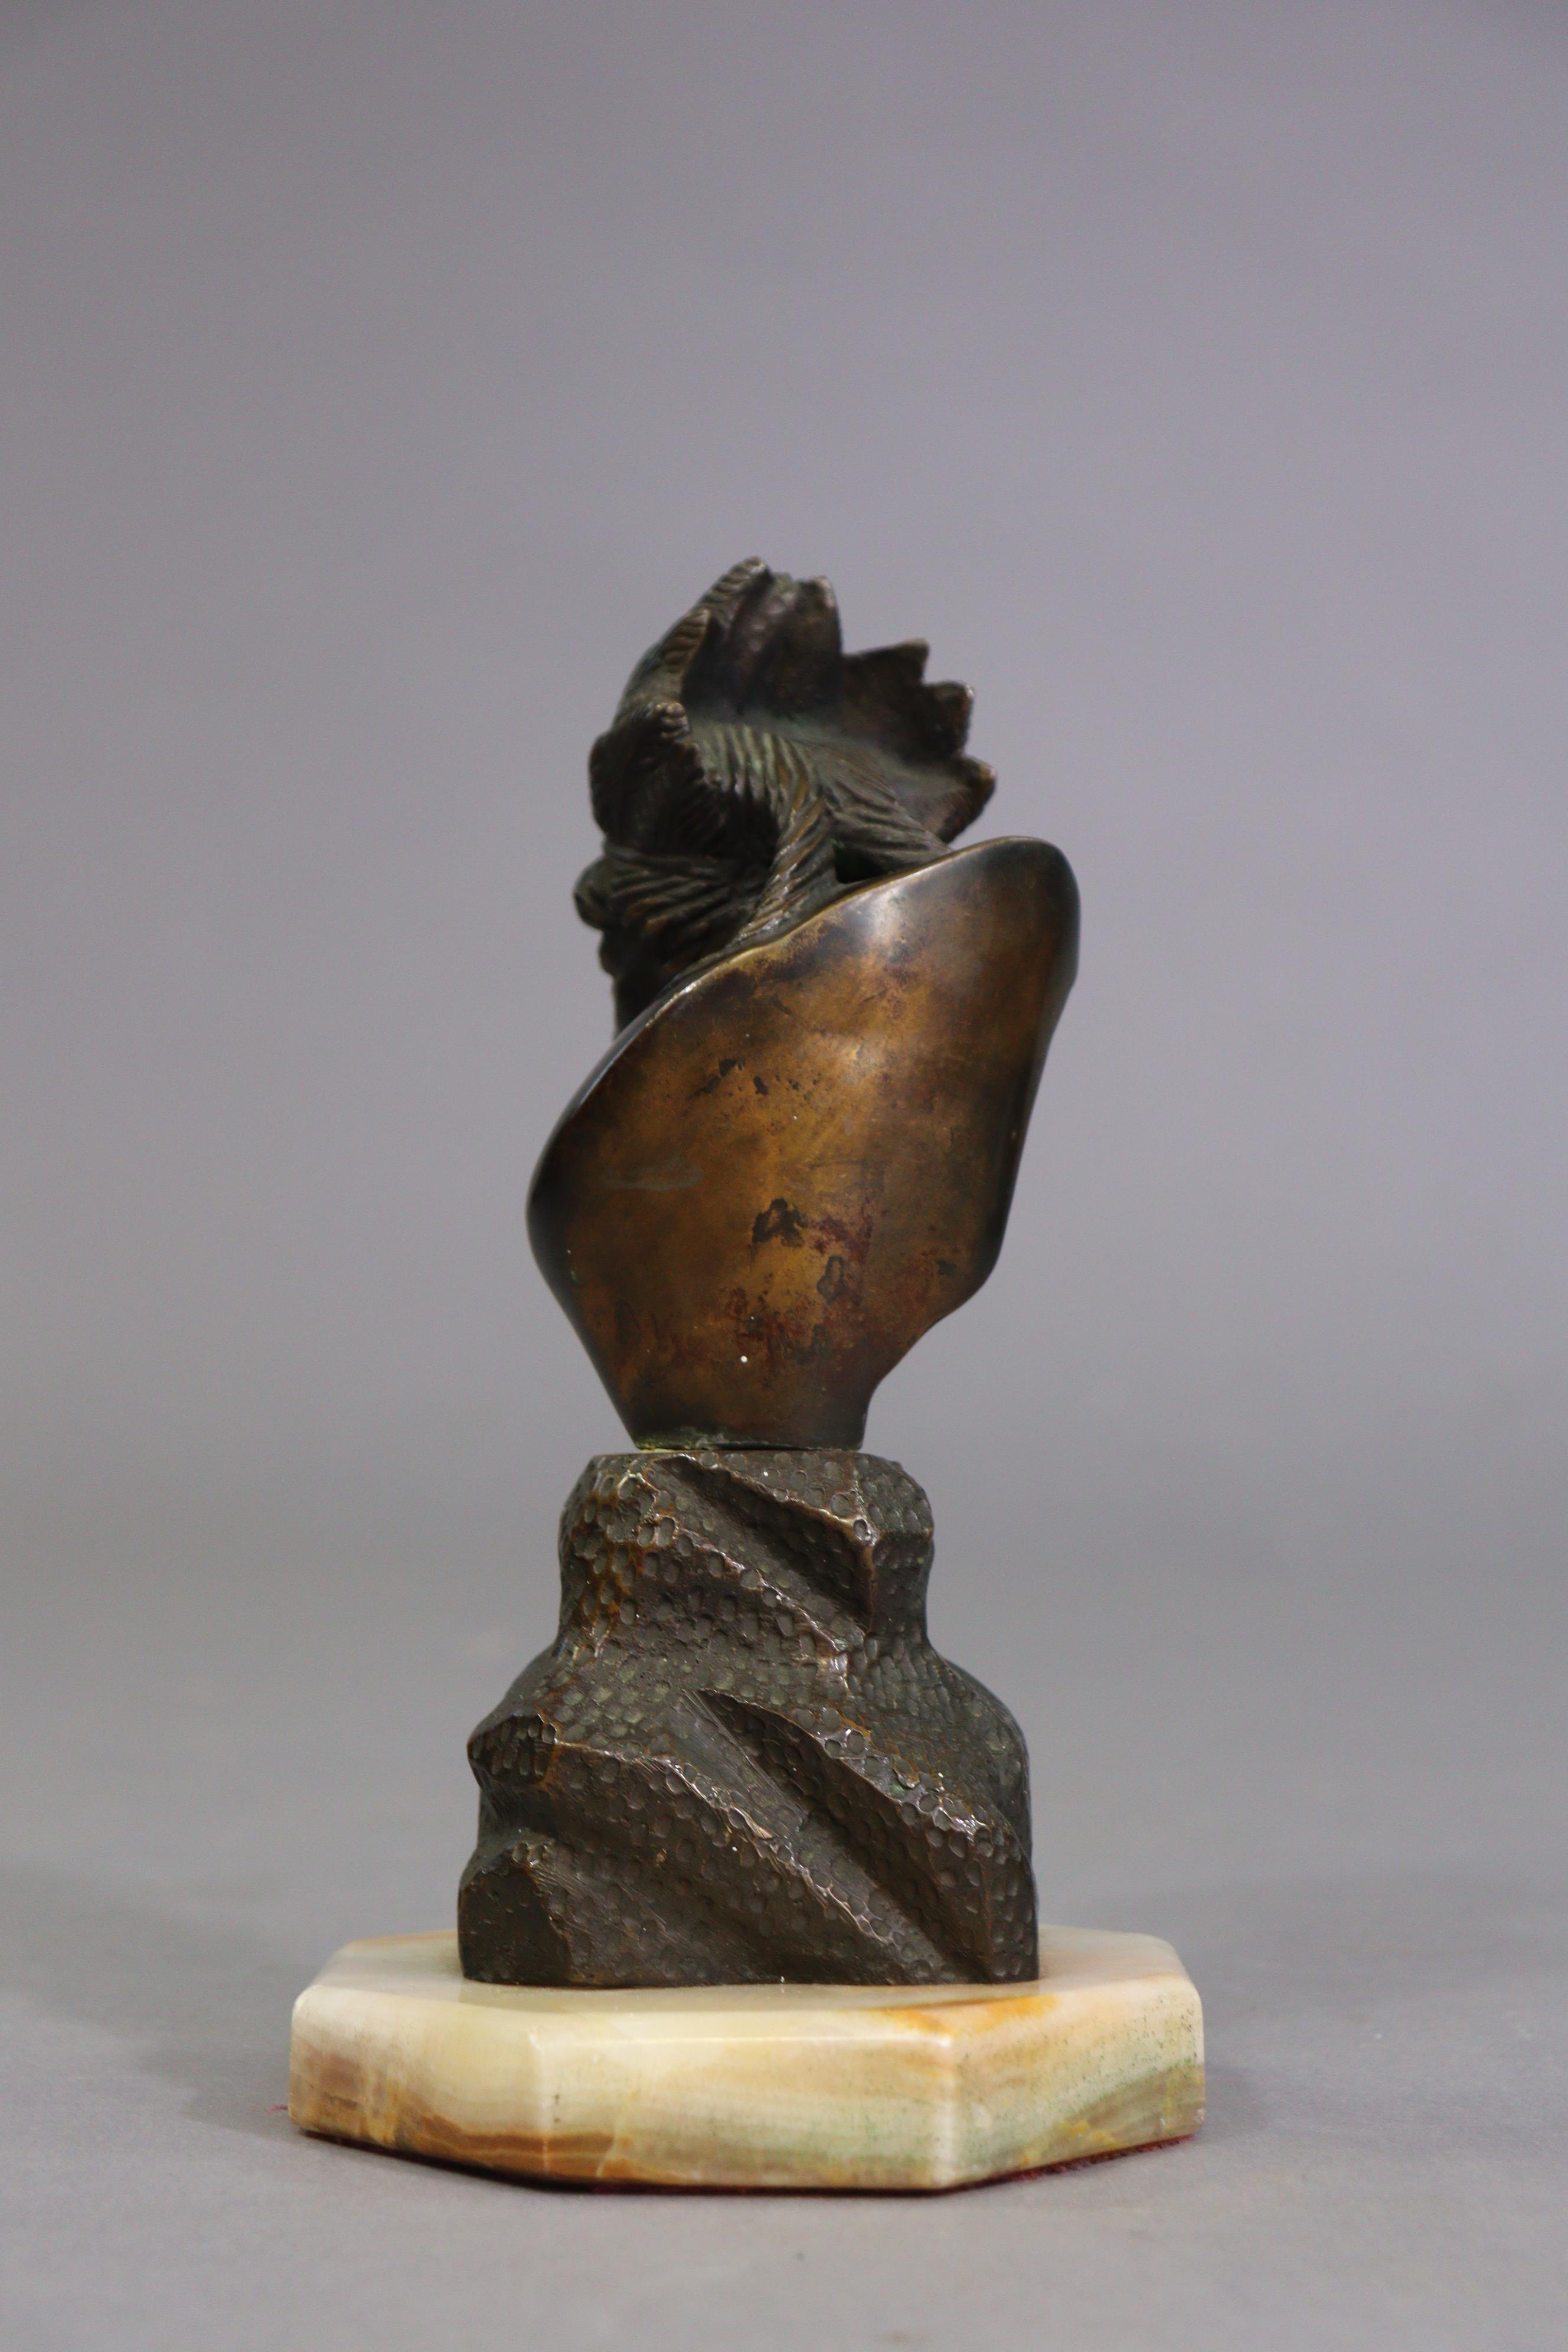 A bronzed Indian chief’s bust sculpture mounted on an onyx octagonal plinth, 22cm high. - Image 4 of 6